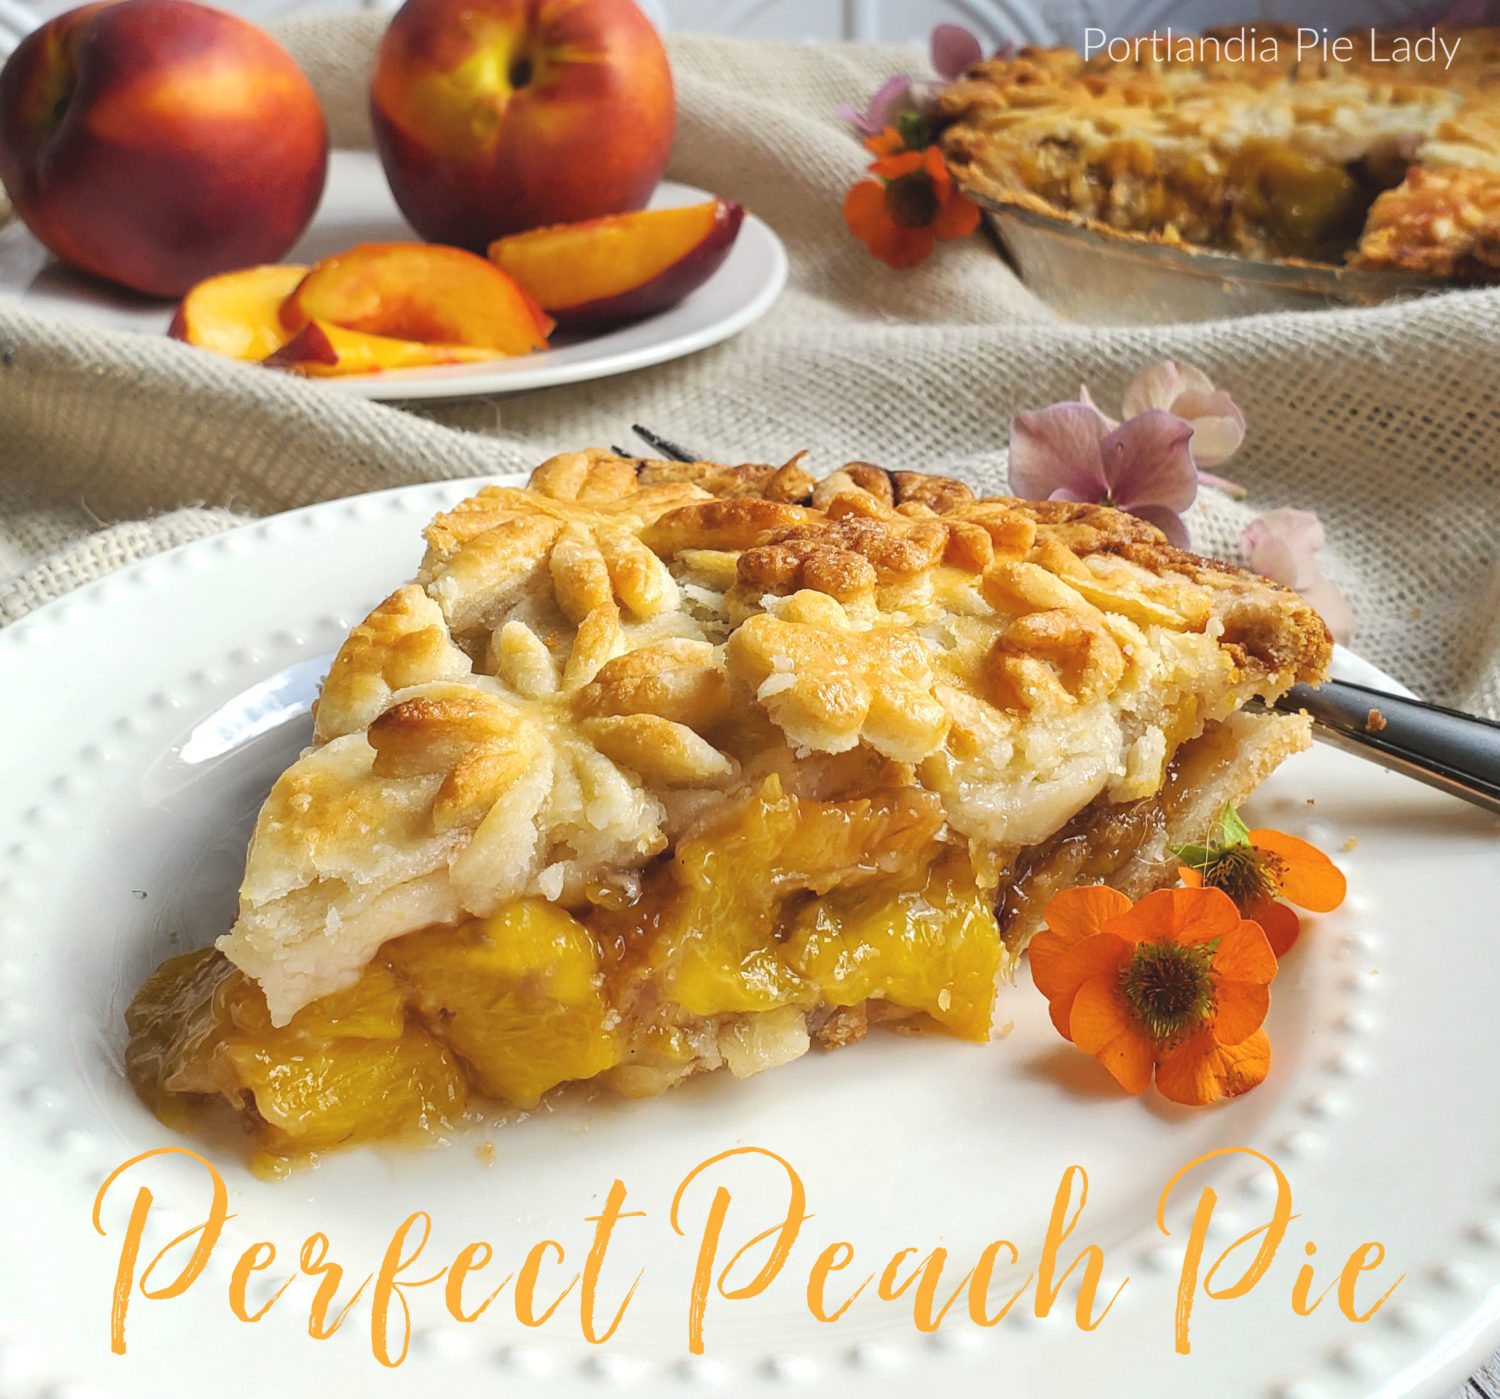 Perfect Peach Pie: Fresh pick peaches baked with a splash of orange to brighten the flavor & adorned with easy to make pie crust flowers!